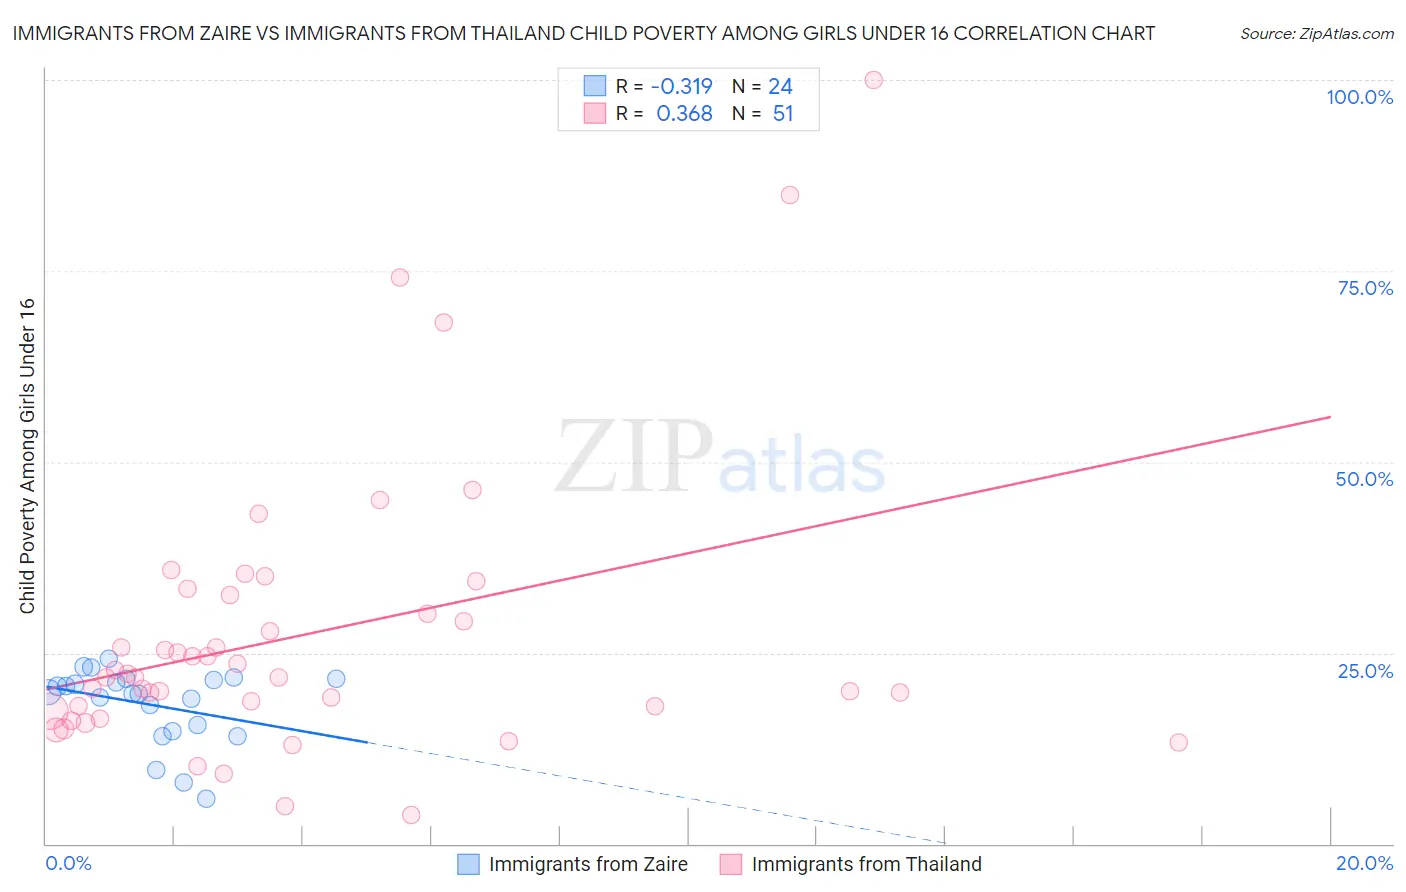 Immigrants from Zaire vs Immigrants from Thailand Child Poverty Among Girls Under 16